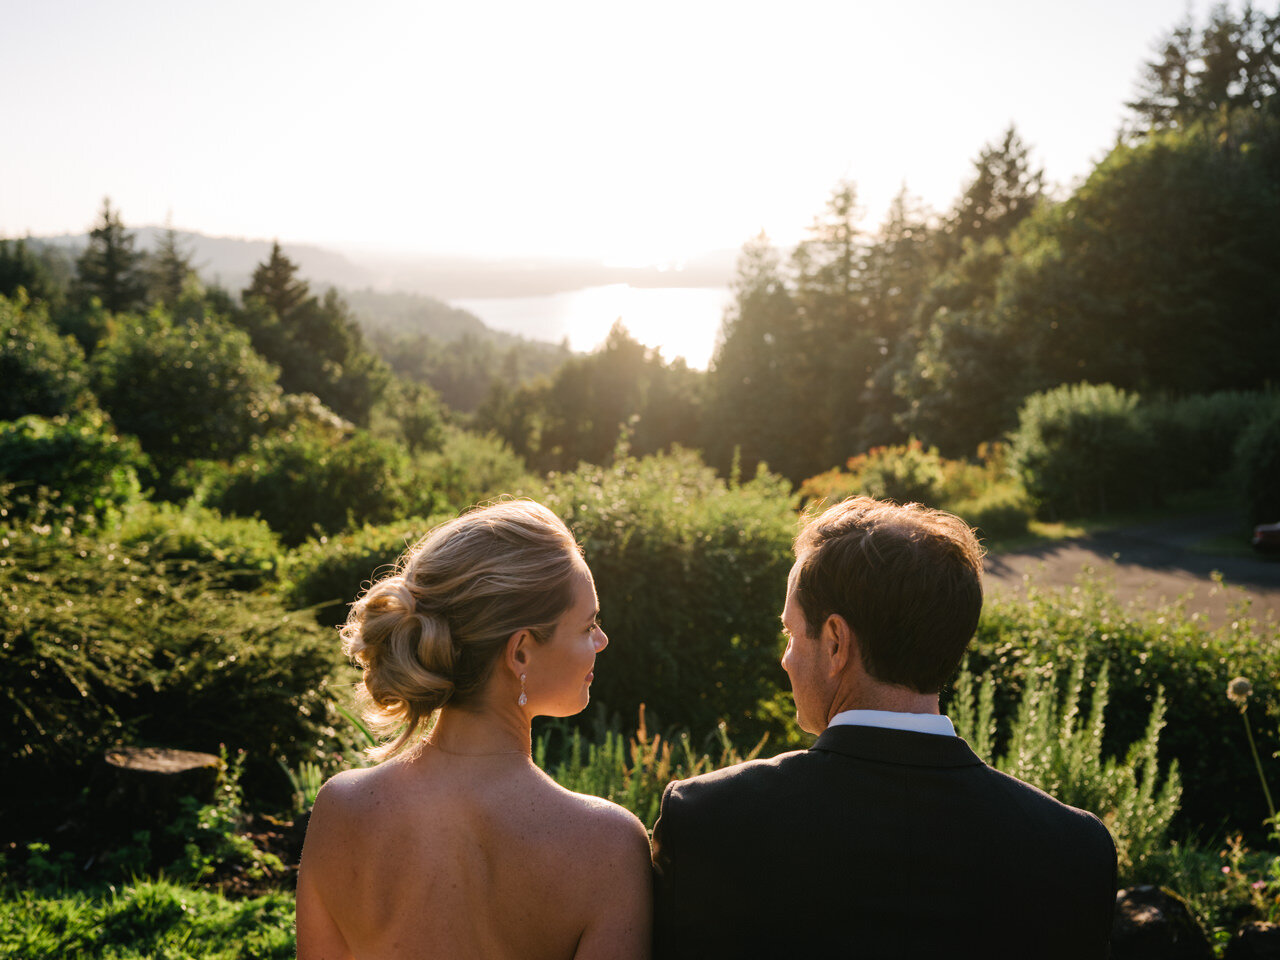  Bride and groom looking at each other as sun gets lower in the sky over Columbia gorge Oregon viewpoint 